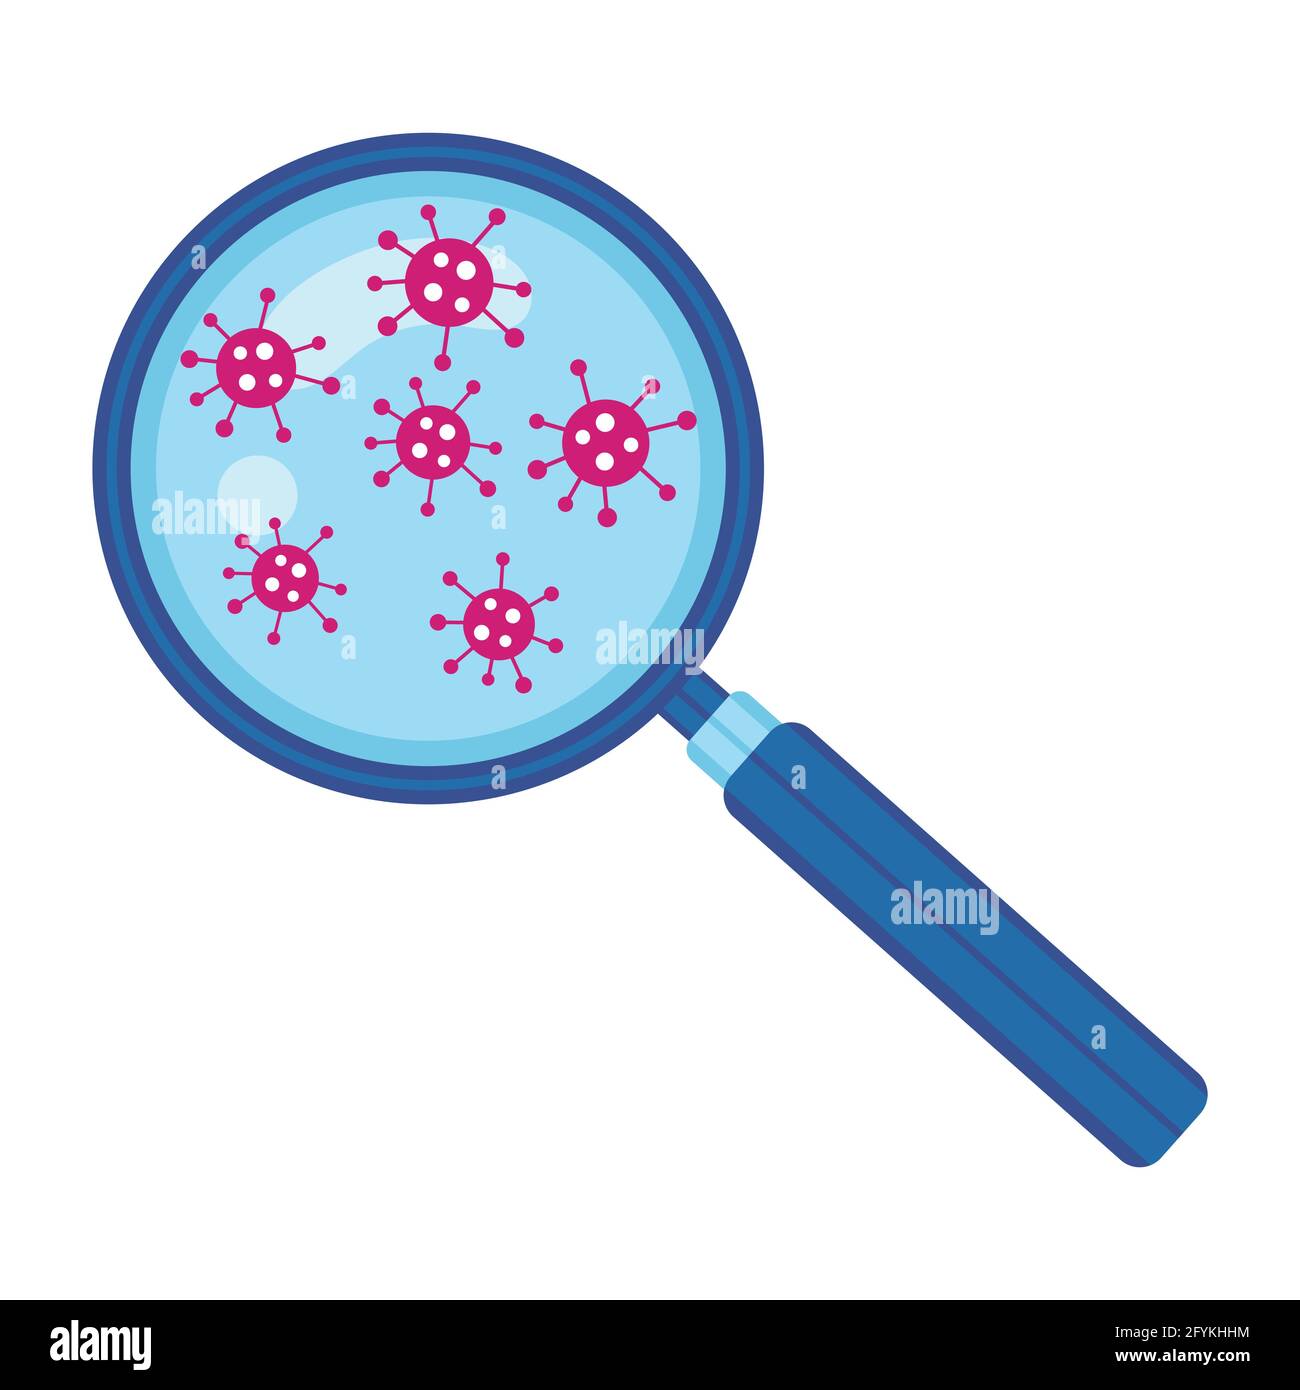 Coronavirus under magnifying glass sign. Magnifier shows viruses or bacteria cell. Optical tool. Detection strain COVID-19. Research disease. Vector Stock Vector